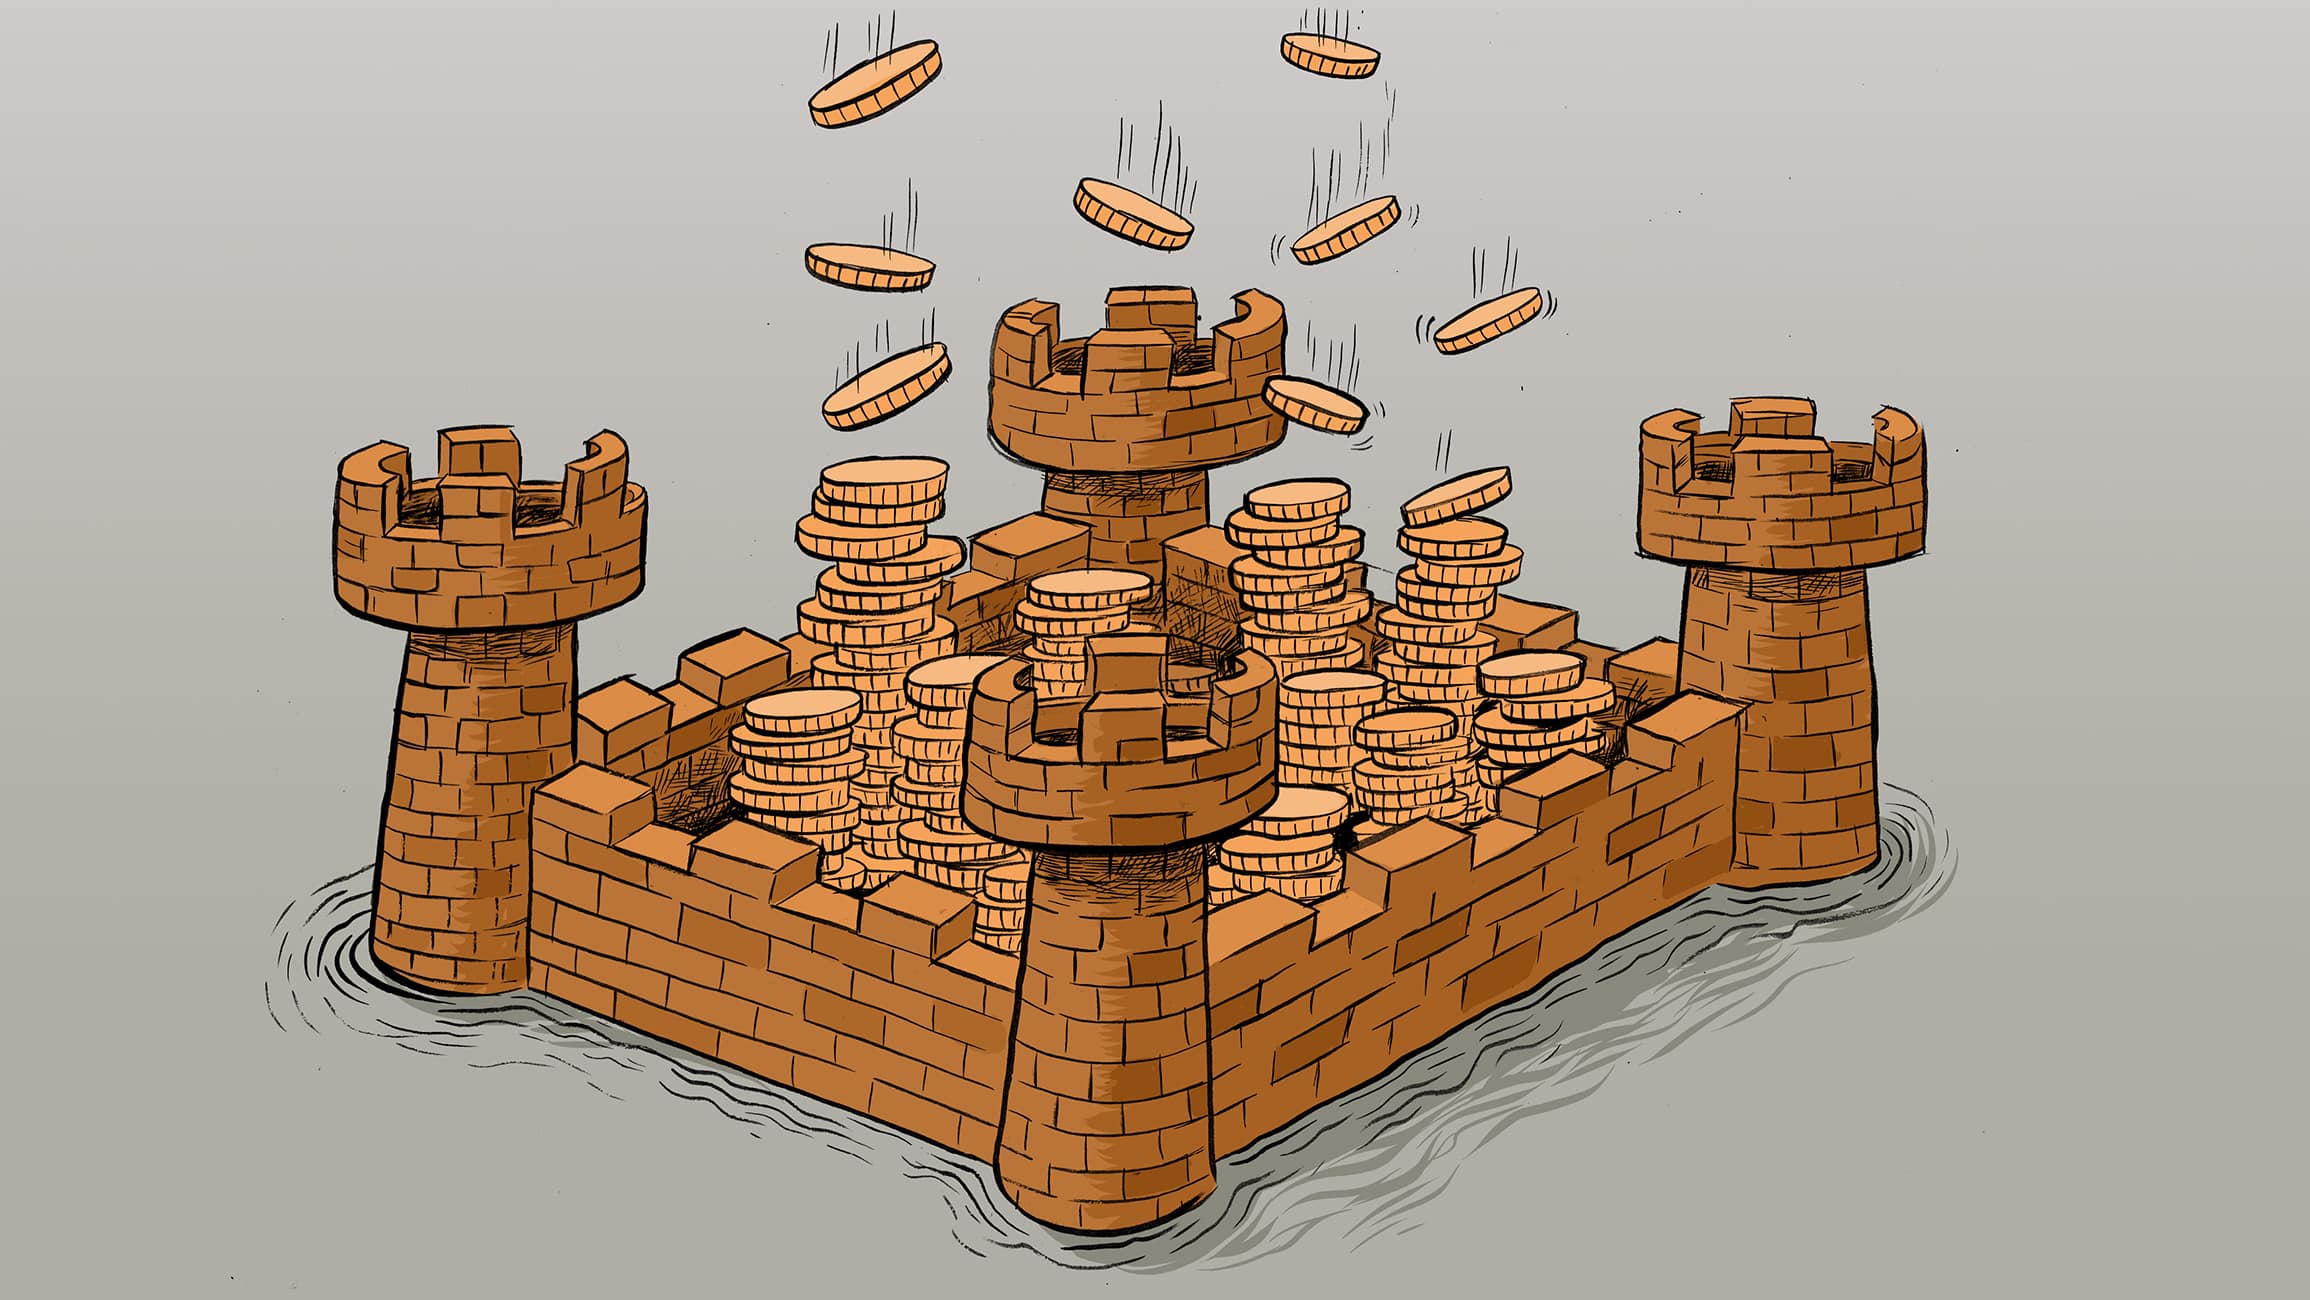 A fortifed castle with coins well protected in the middle and growing in quantity